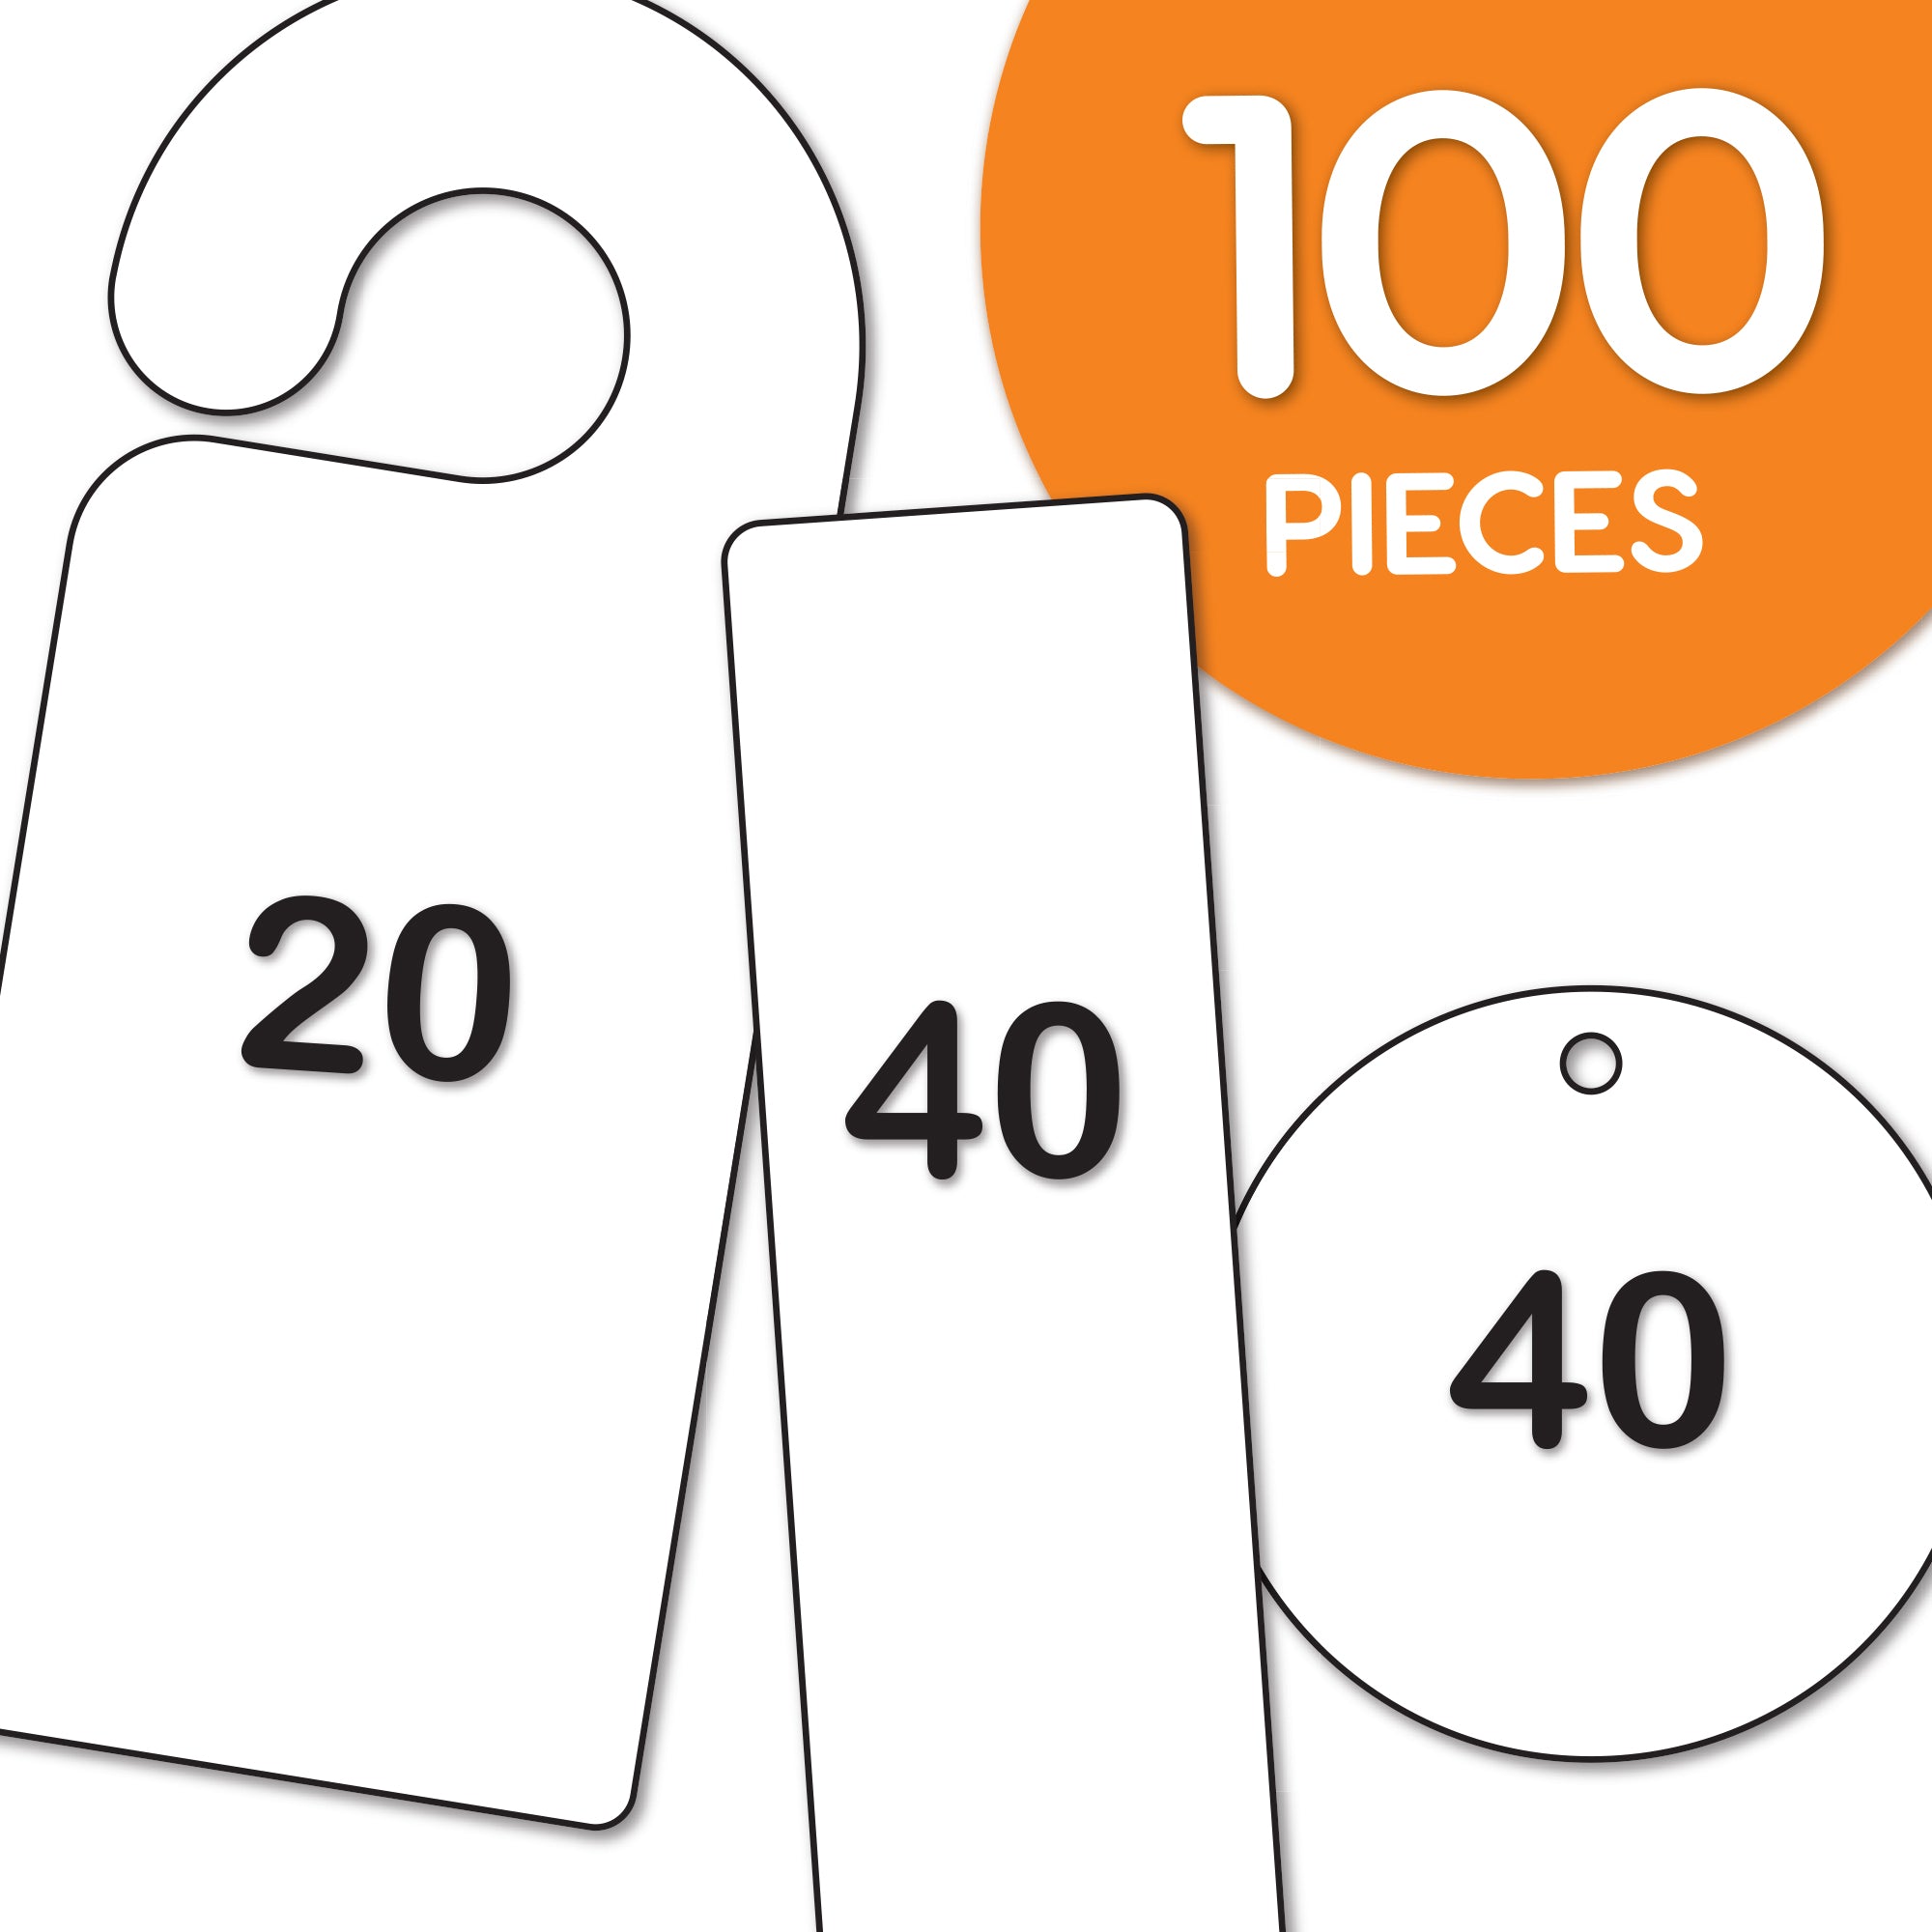 FreshCut Crafts | DIY Craft Cutouts 100 Pcs Blank Bookmarks, Door Hangers, Gift Tags, Happy Colors, US Made Card Stock Punch Out Paper Craft Cutouts